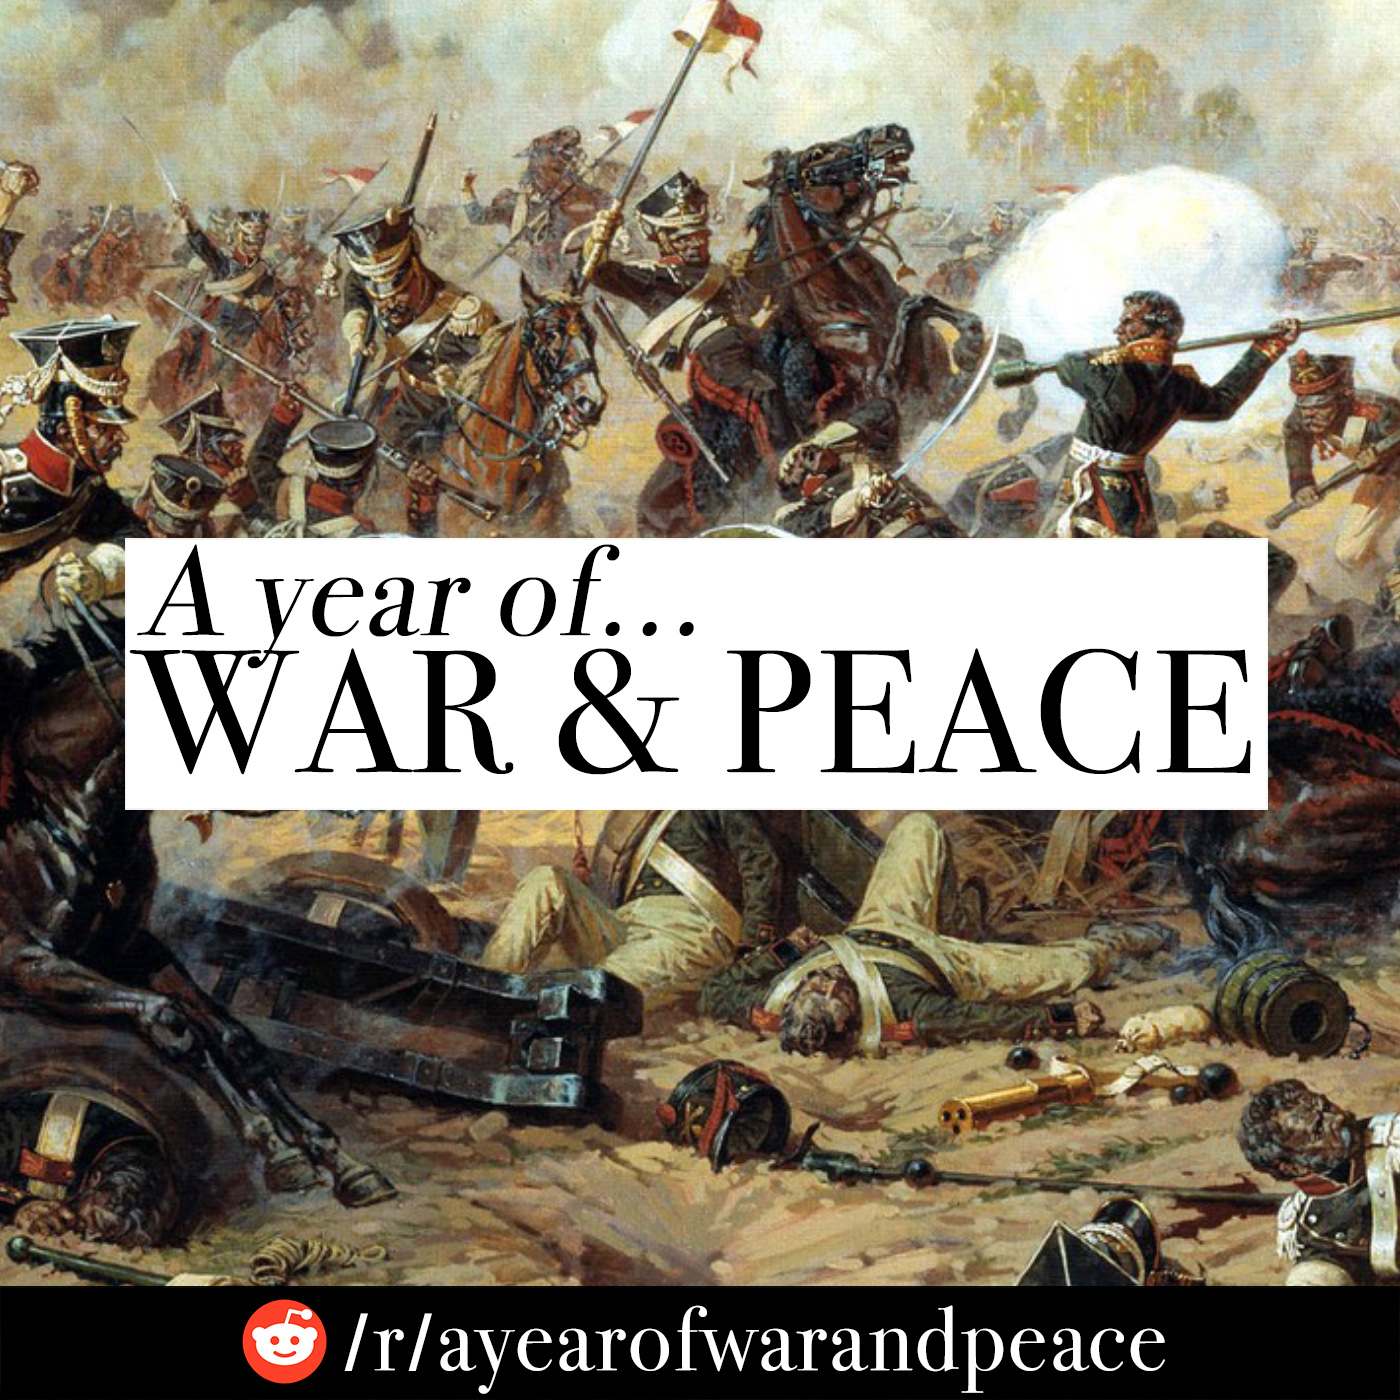 041 - Book 2, Chapter 13. War & Peace Audiobook and Discussion